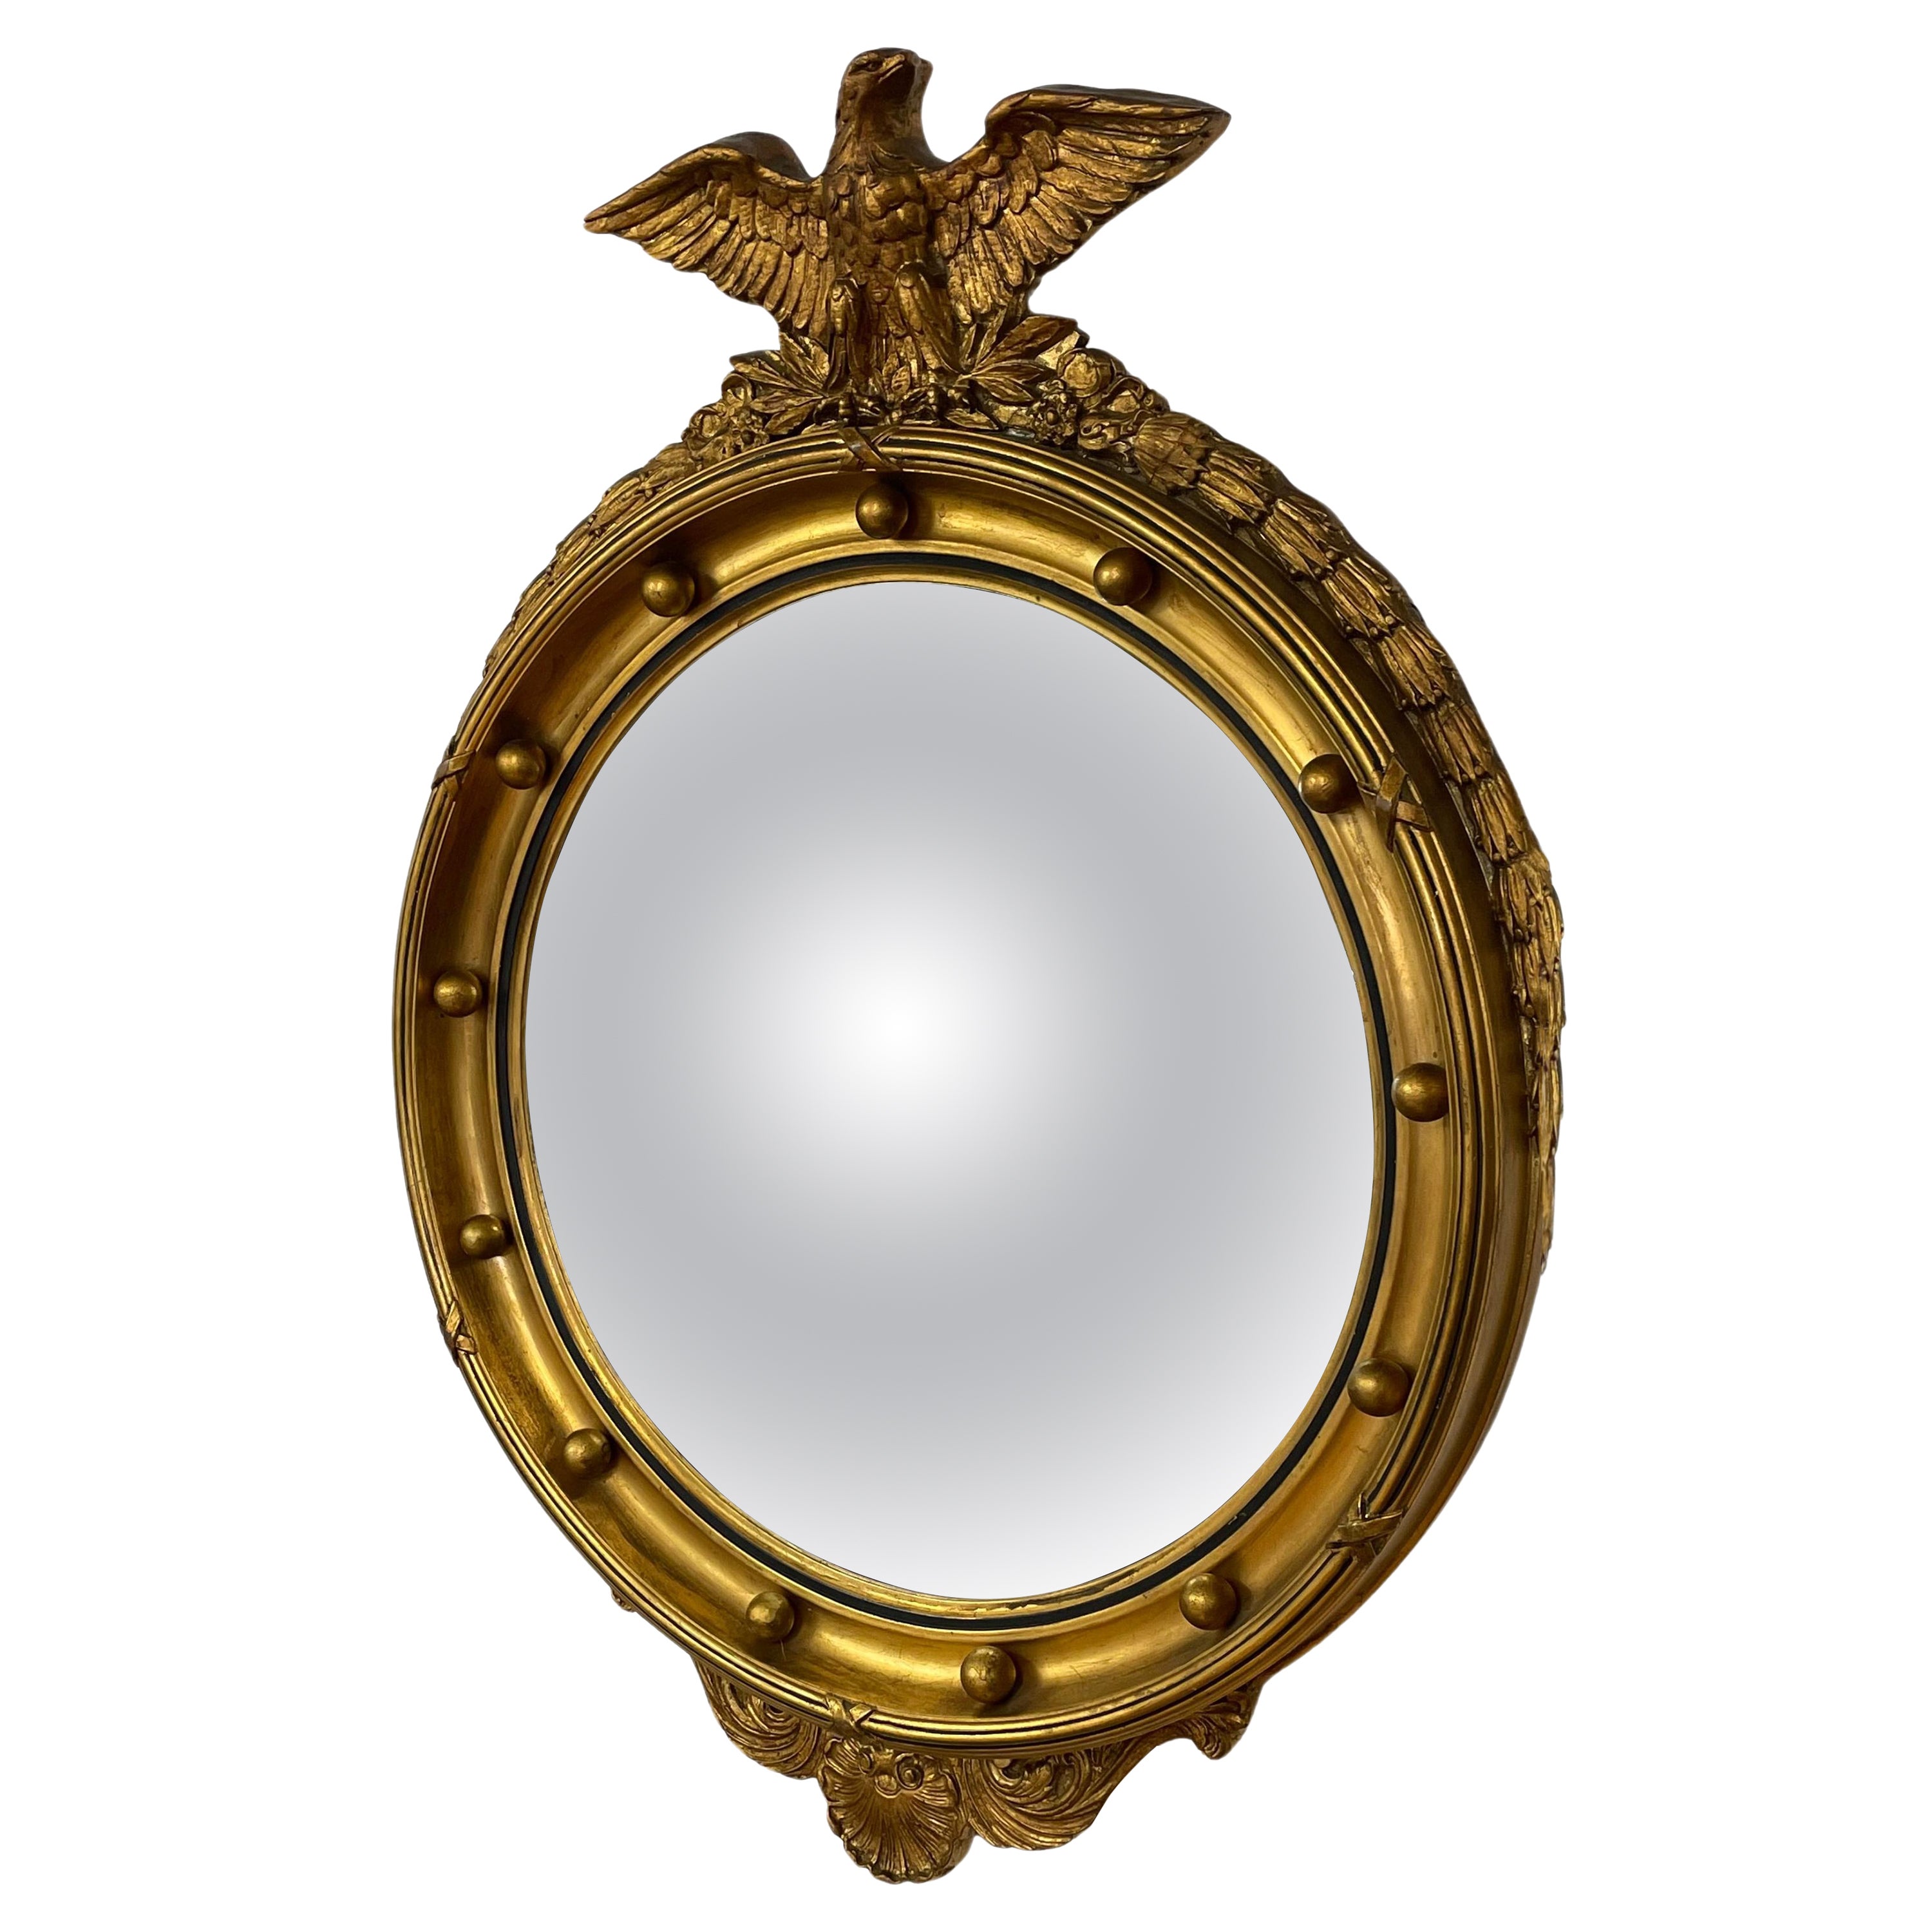 Federal-style convex guiltwood bulle-eye mirror For Sale